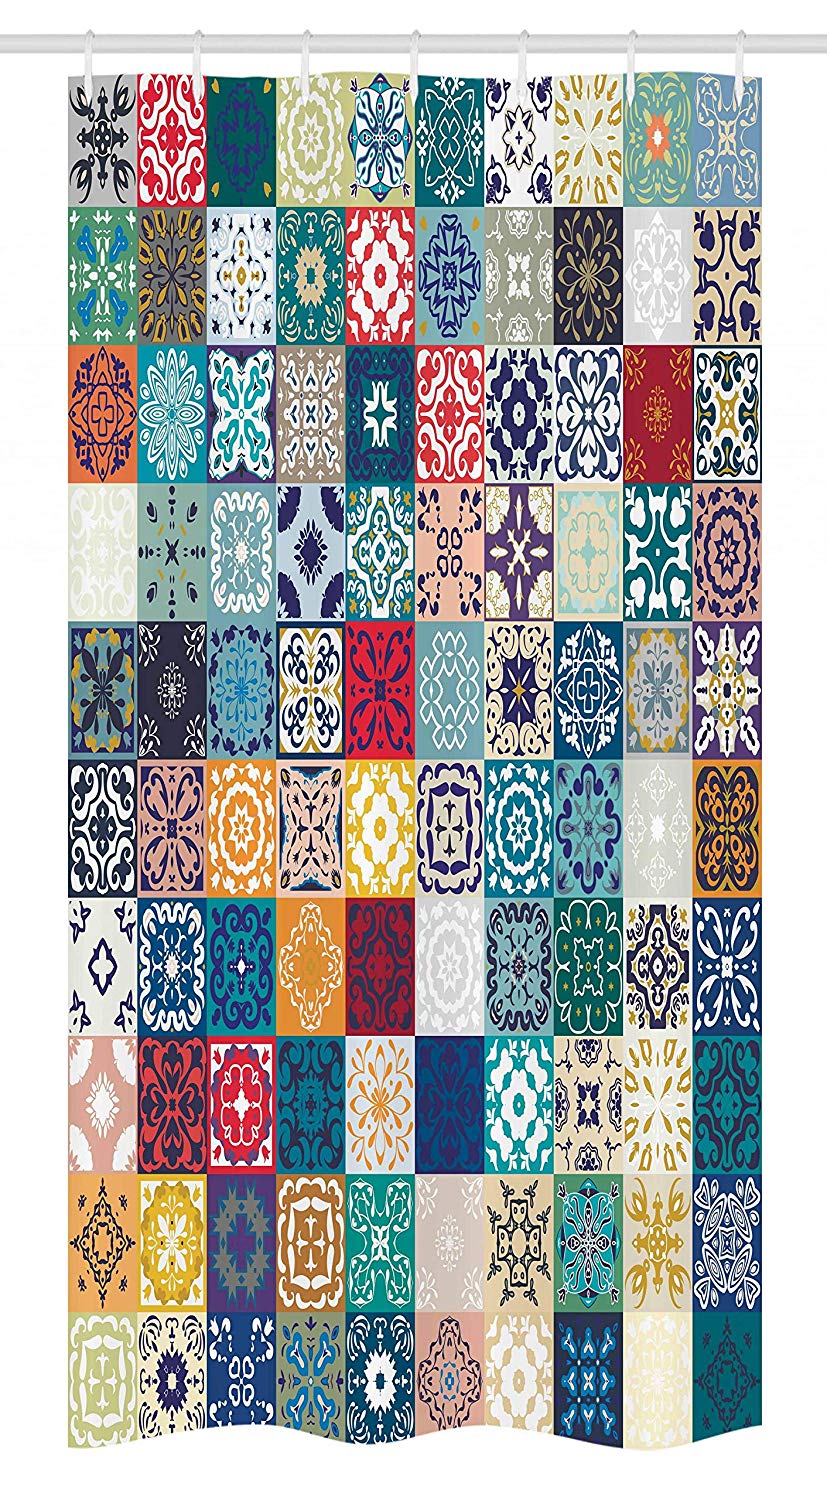 Ambesonne Moroccan Stall Shower Curtain, Patchwork Pattern with Different Colorful Arabic Figures Original Tunisian Artful, Fabric Bathroom Decor Set with Hooks, 36 W x 72 L Inches, Multicolor